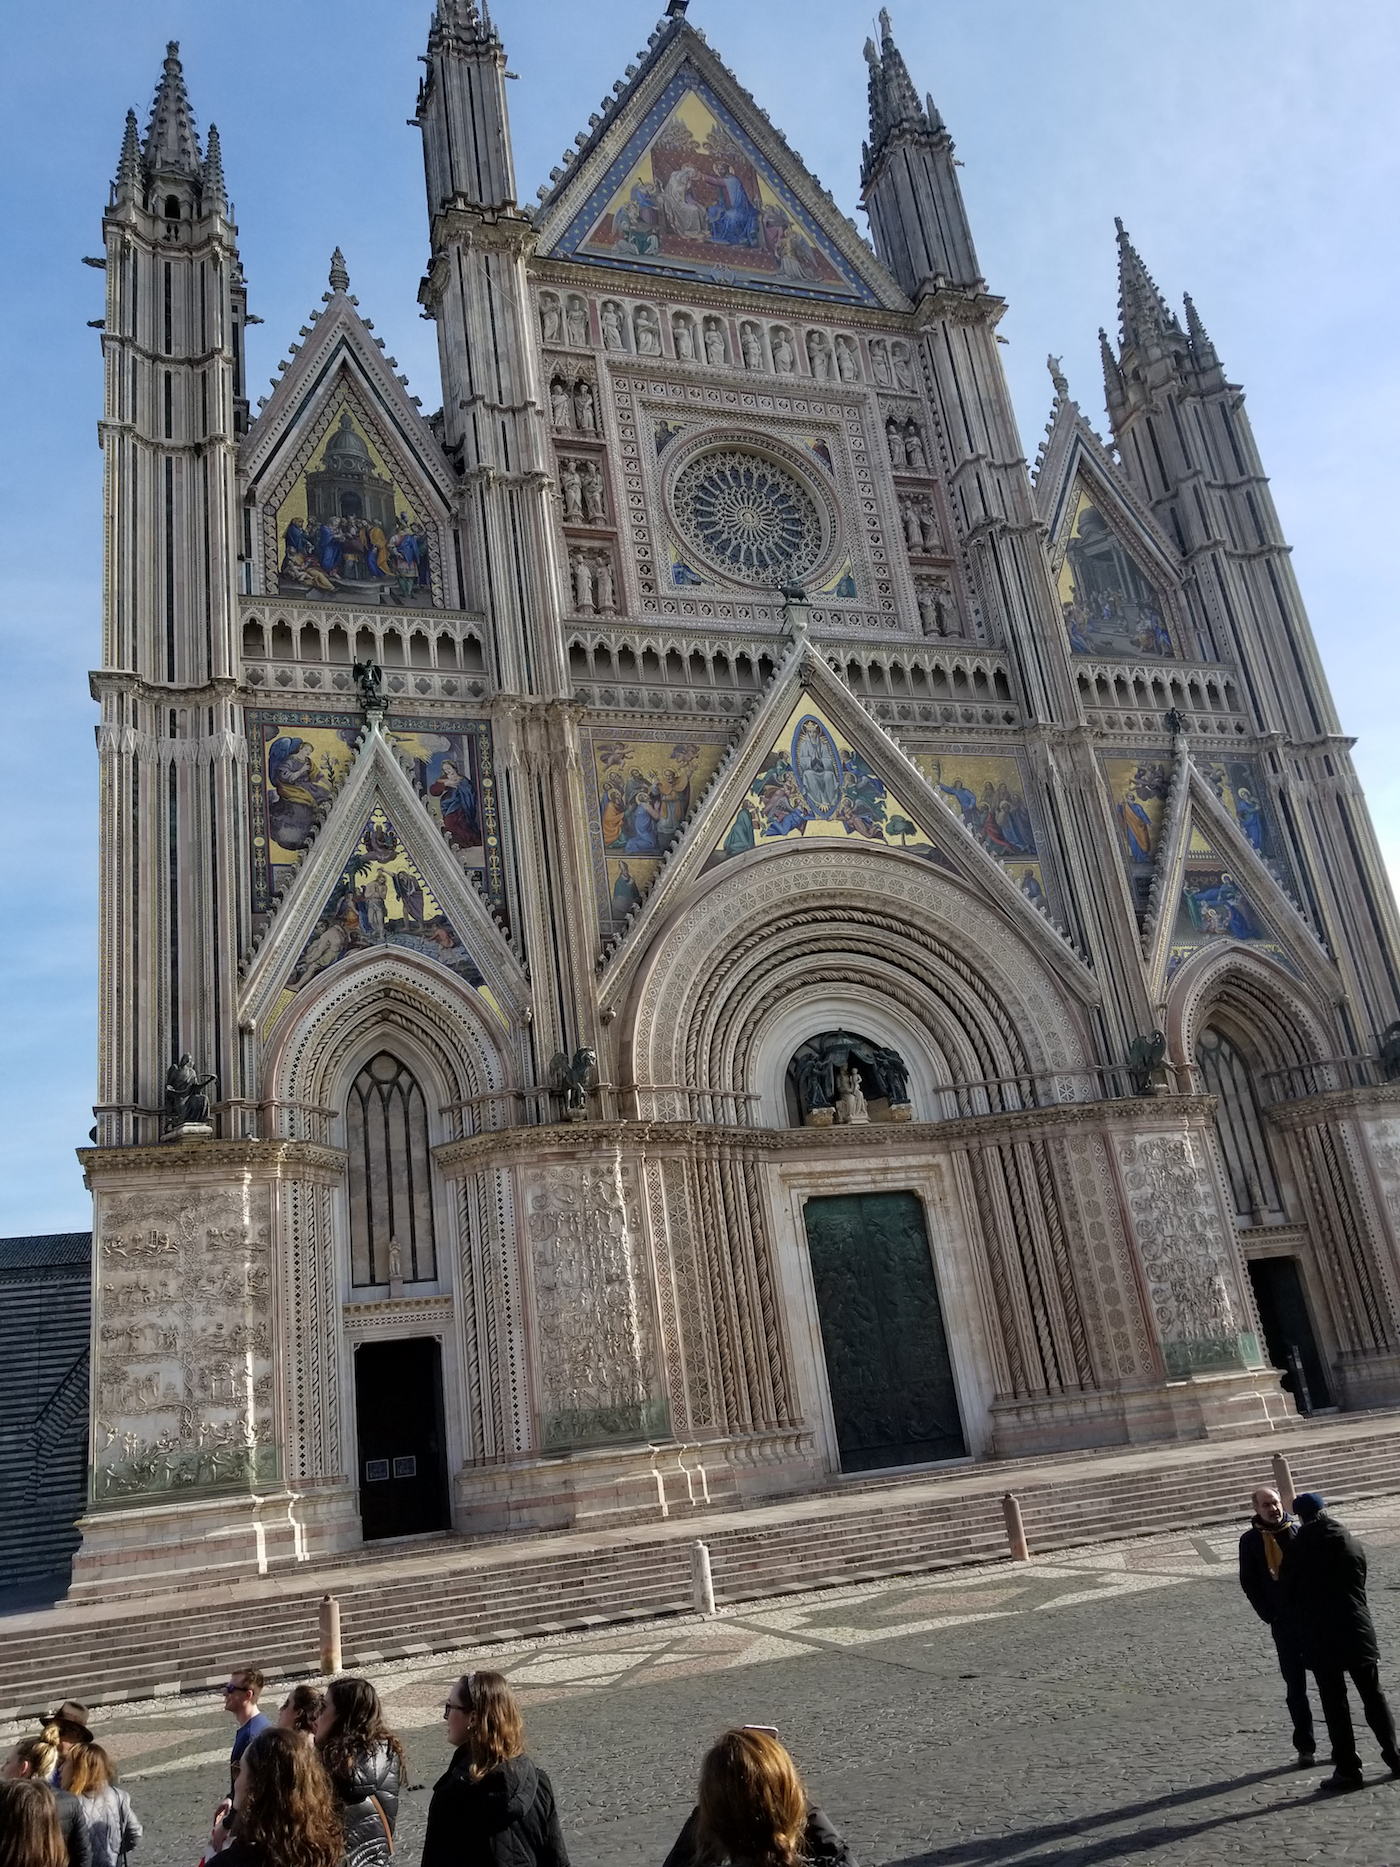 Anselmians Abroad; A Student’s Perspective on Orvieto